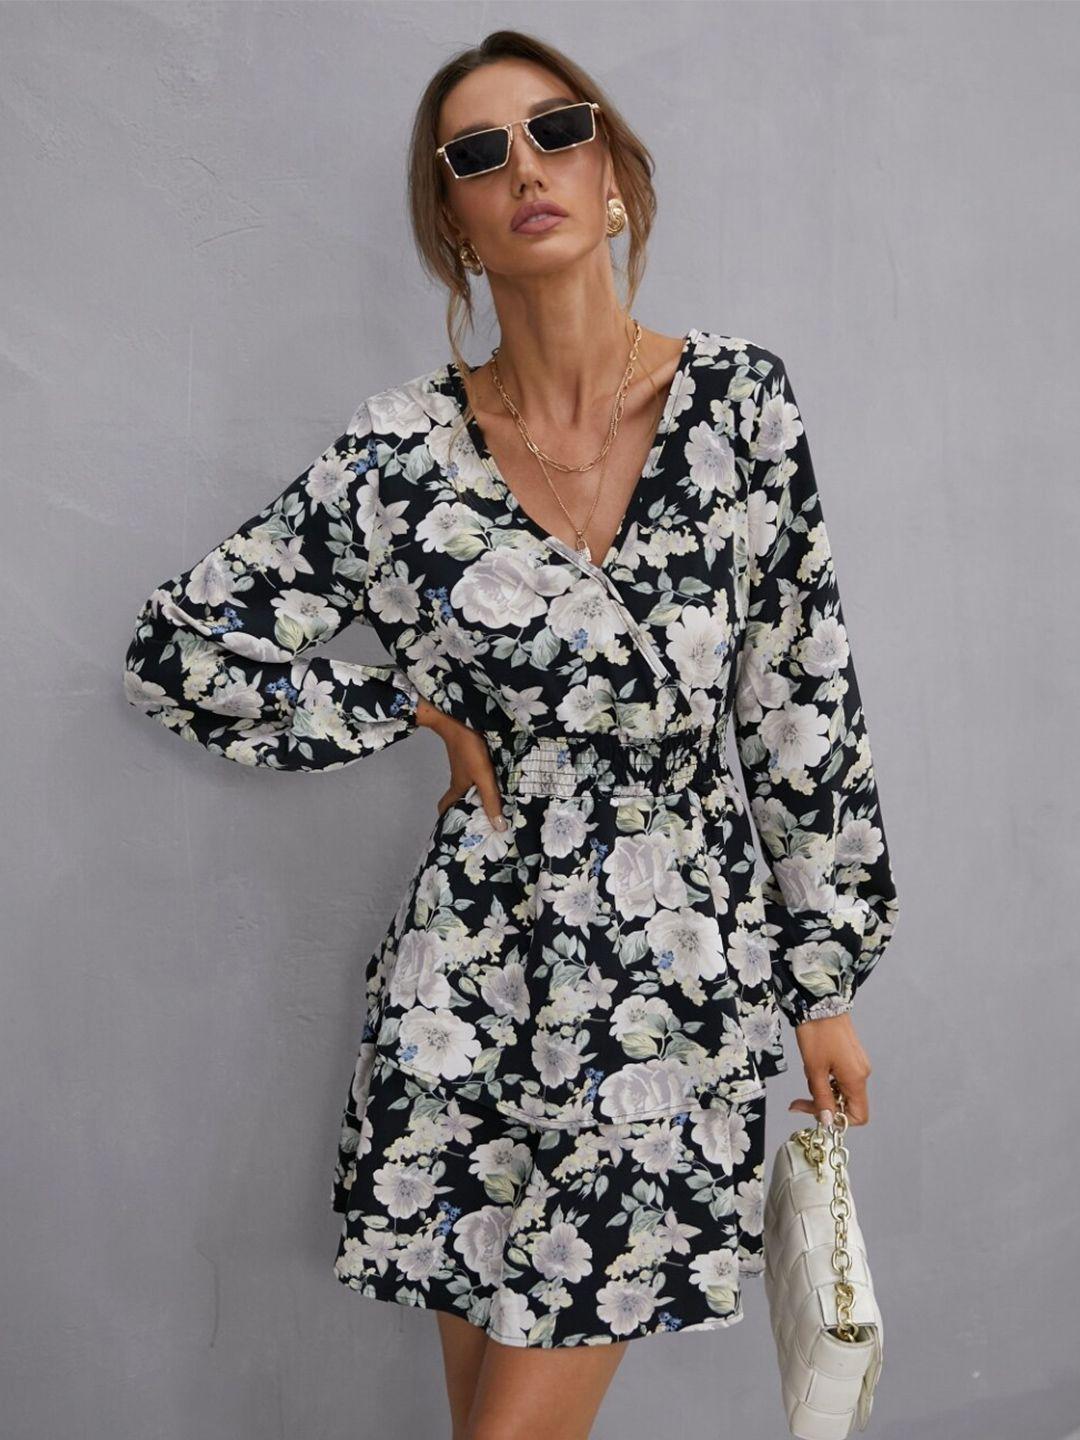 stylecast navy blue floral printed v-neck puff sleeves smocked fit & flare dress